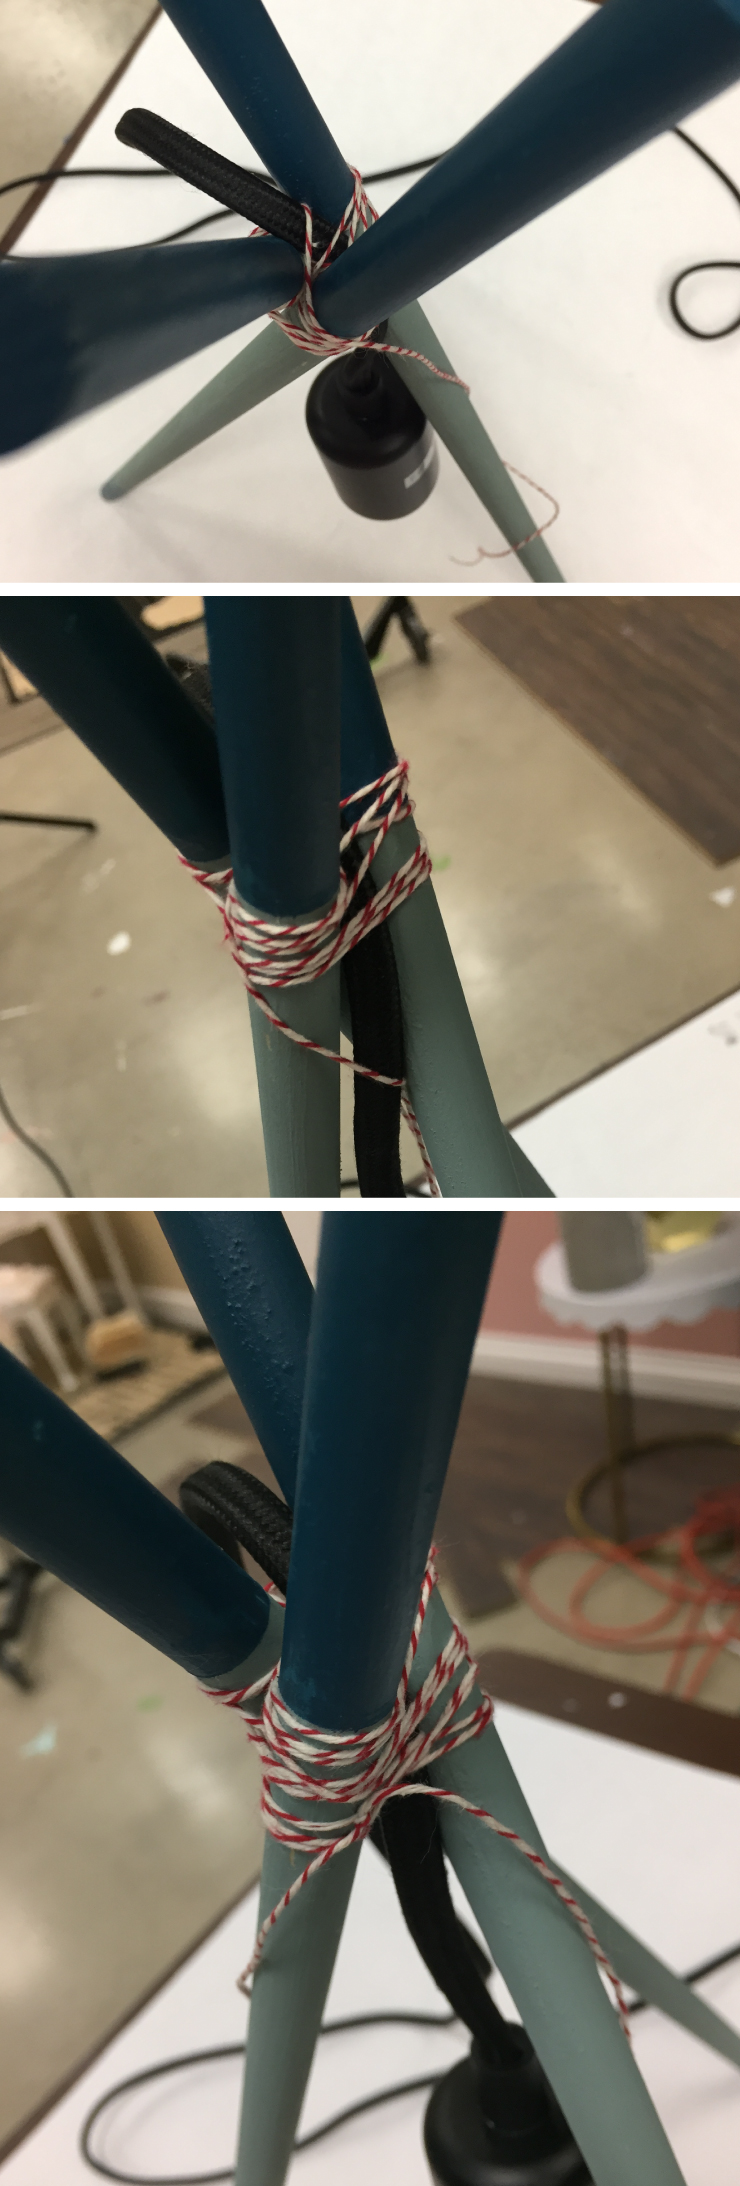 Showing the string tied around the bundle of dowels with electrical cord